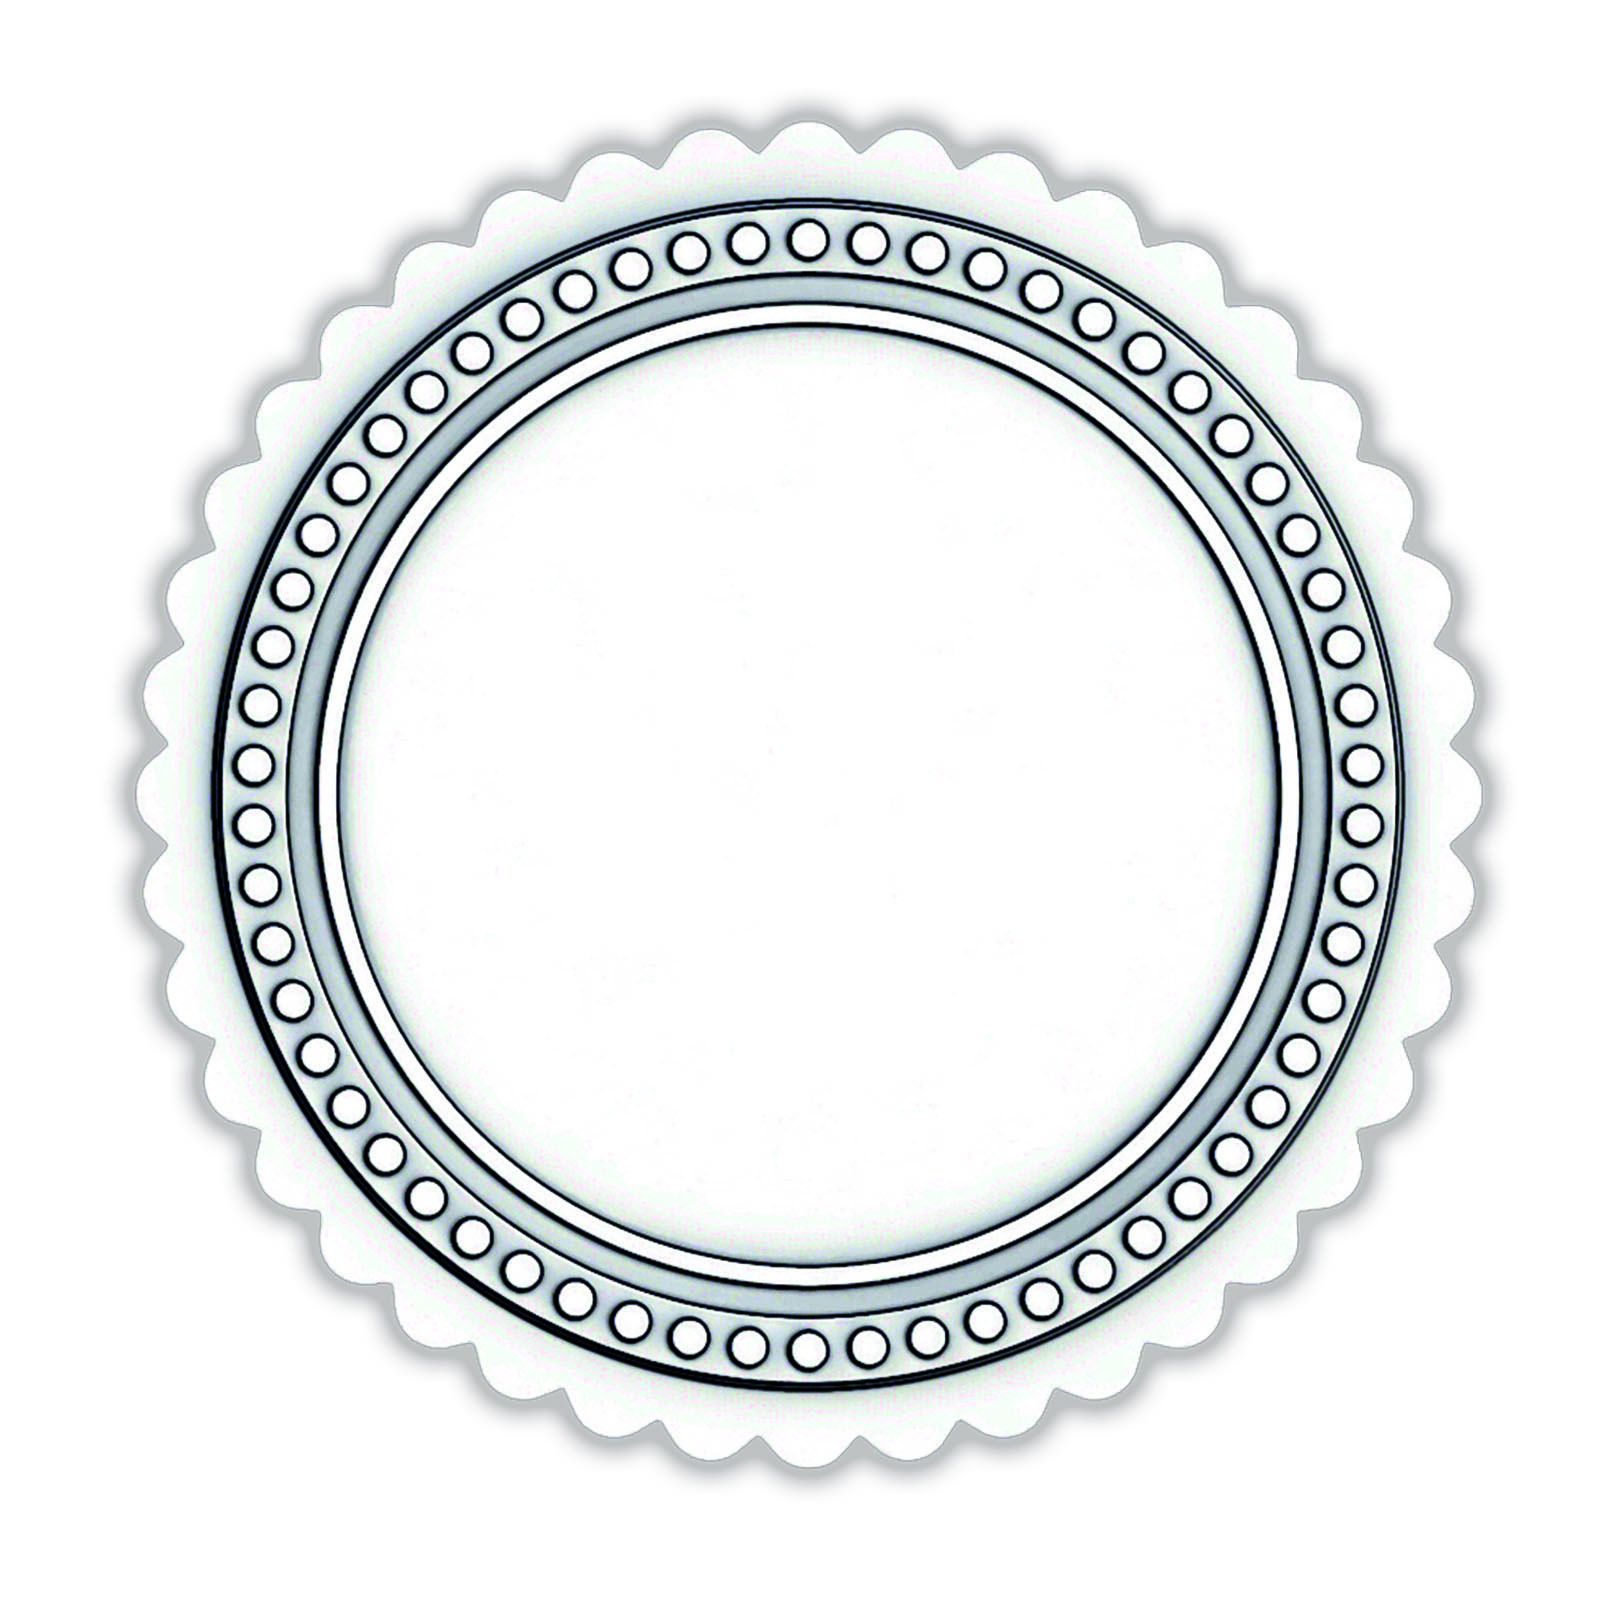 Sizzix • Switchlits embossing folder Seal